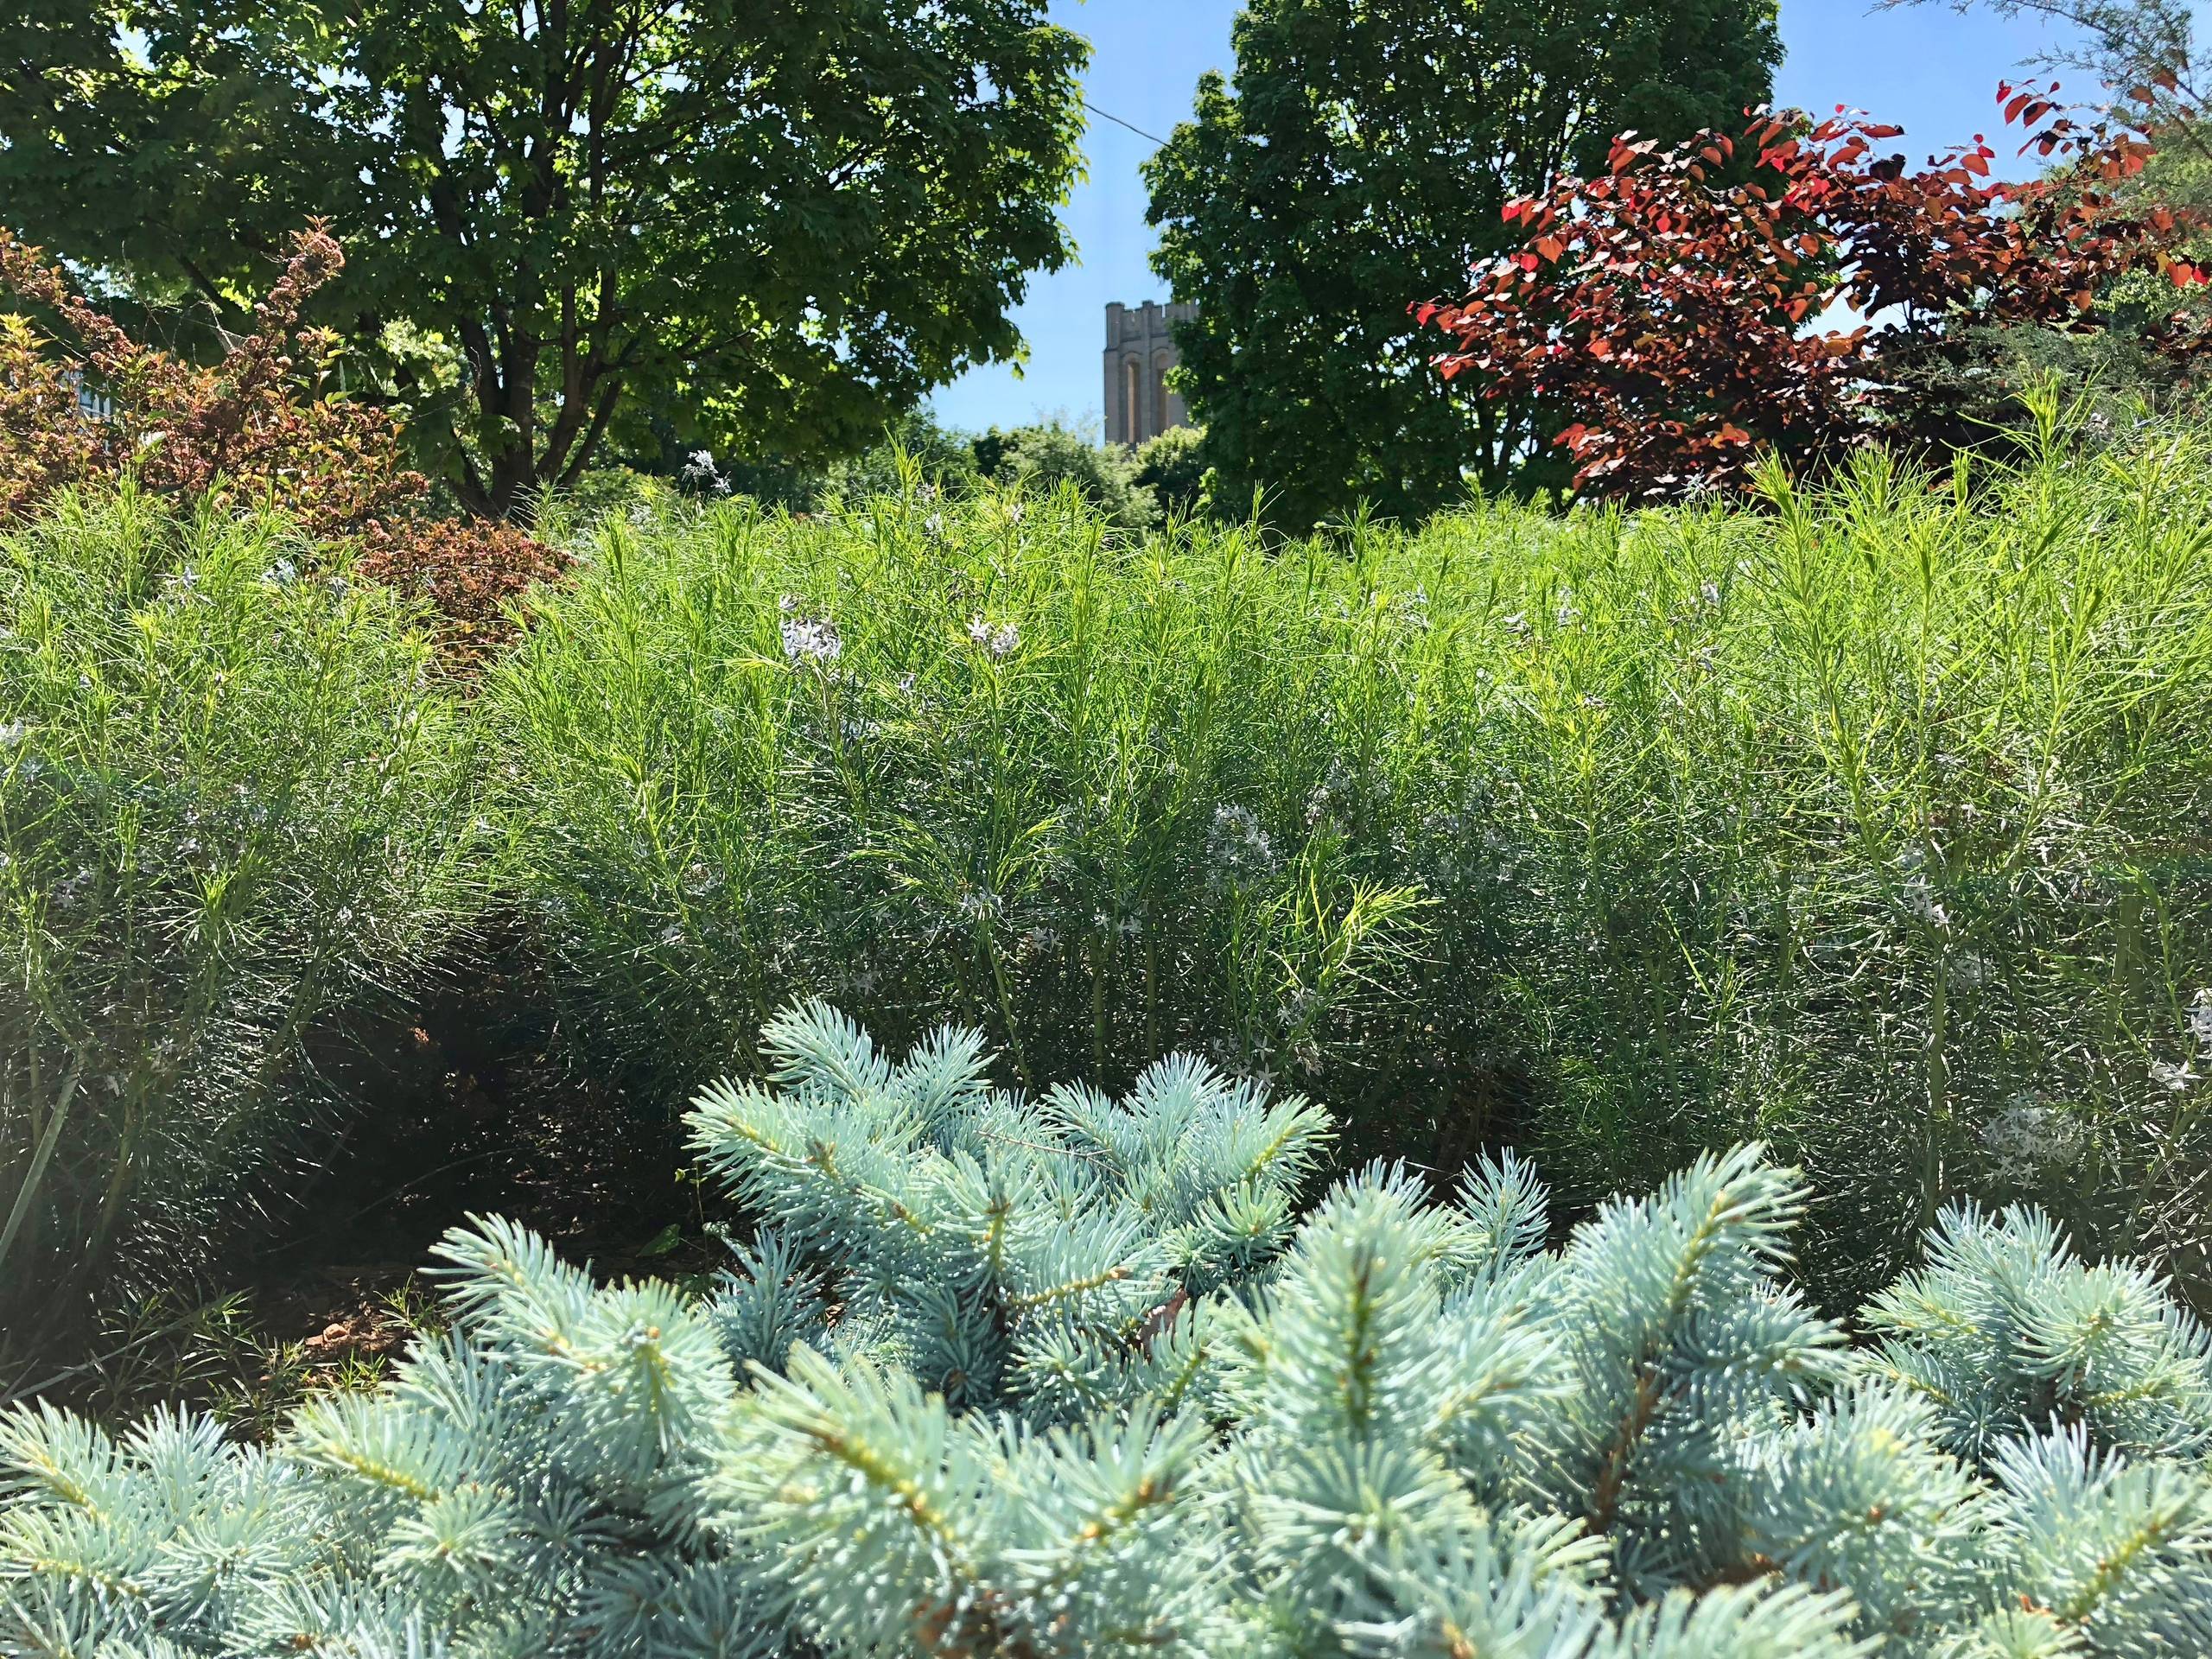 Blue spruce and amsonia in a city oasis.